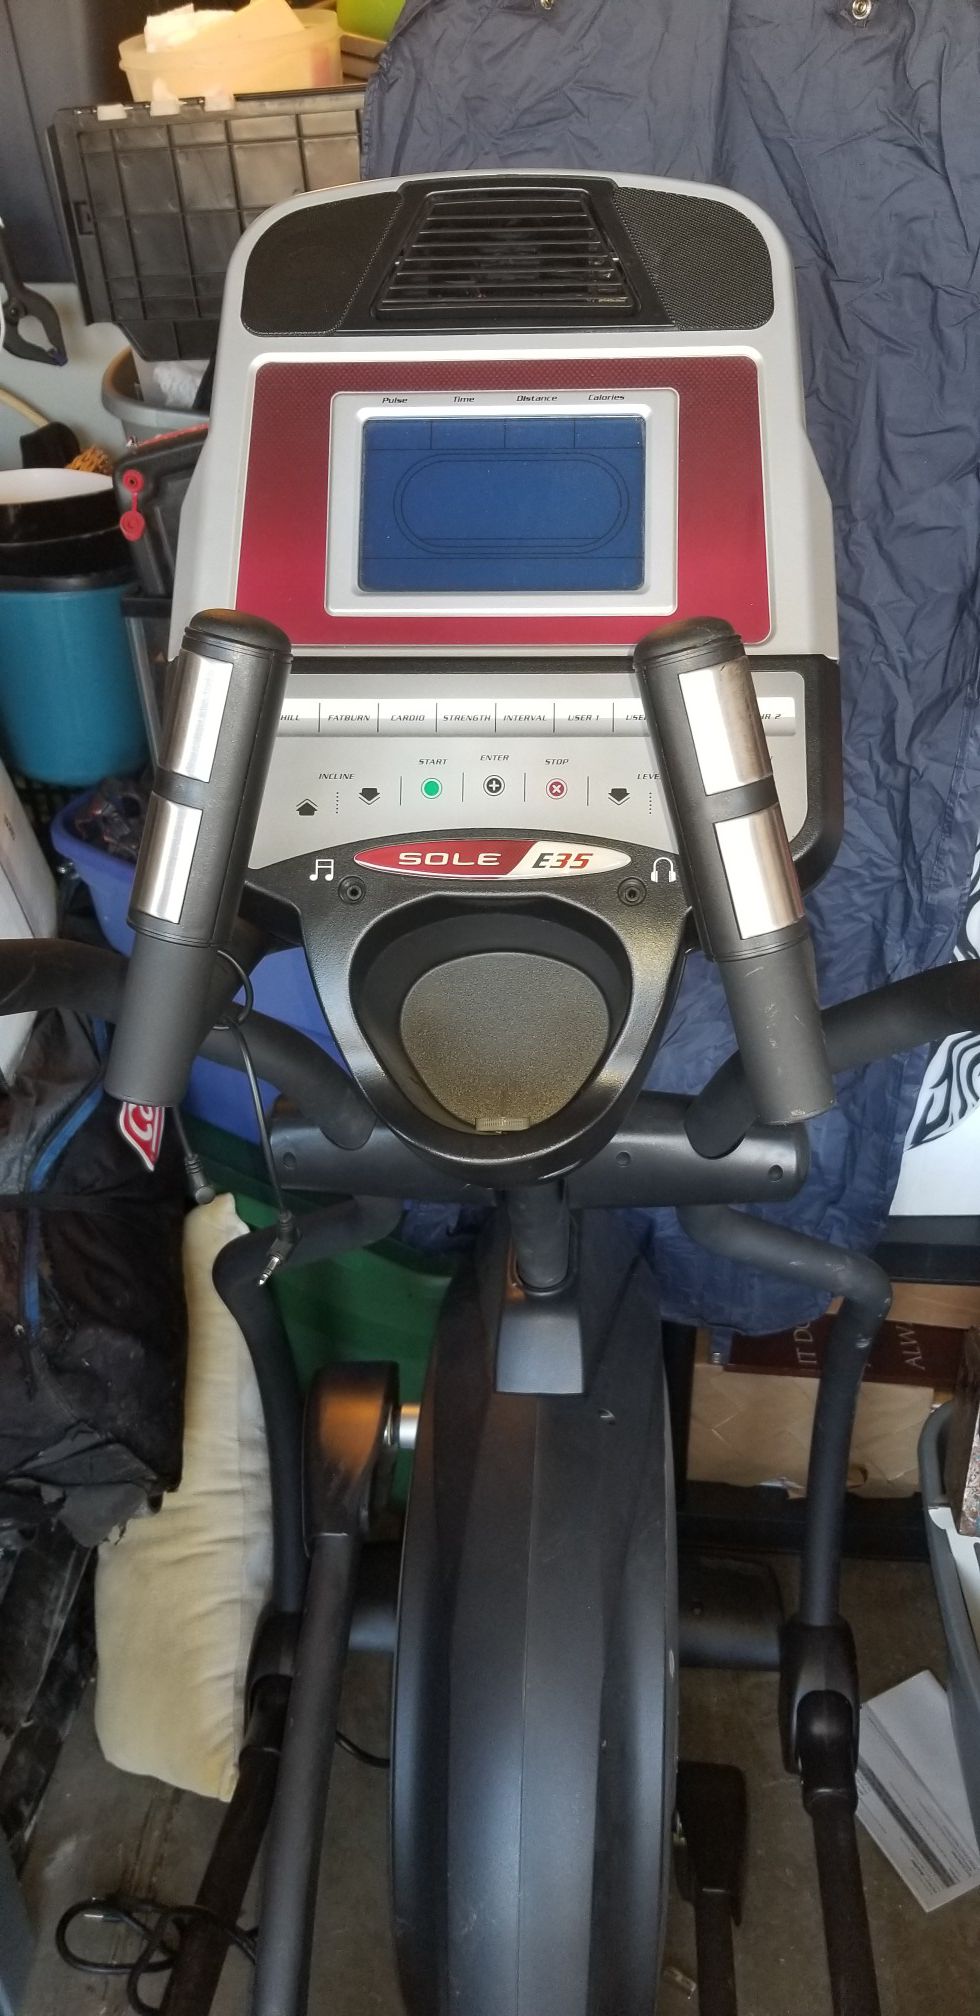 Sole Fitness E35 Elliptical Trainer - tested working good